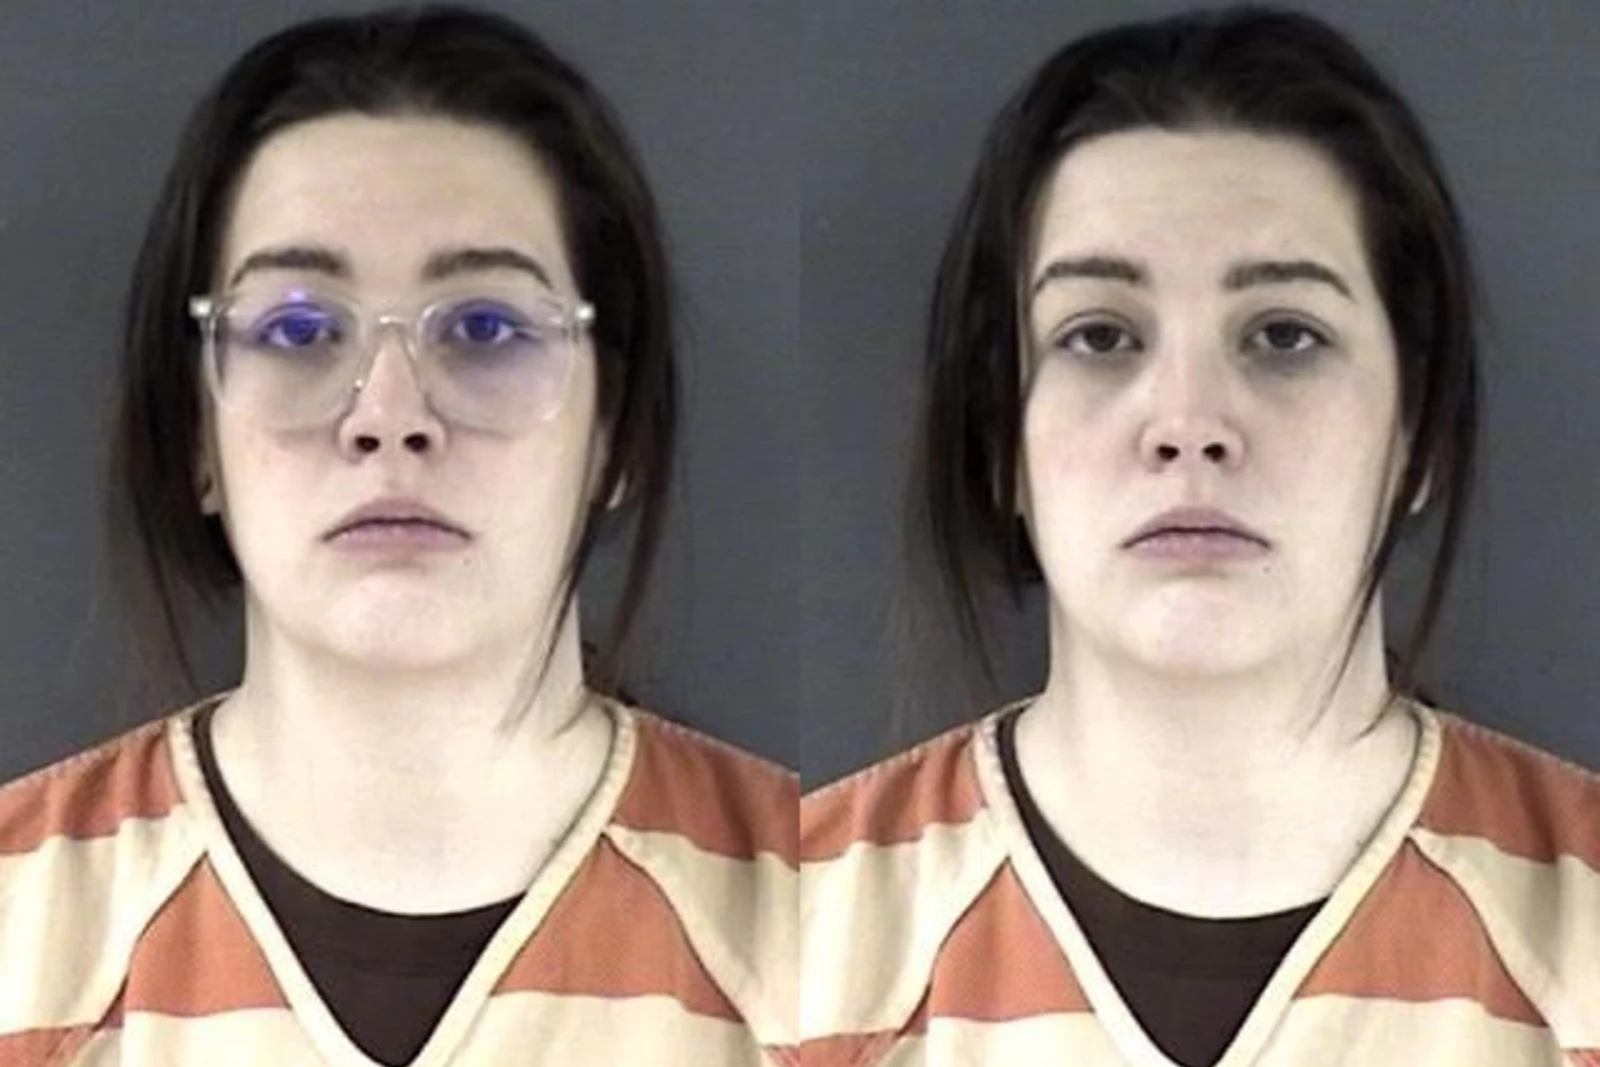 Burns Woman Gets 32-36 Months in Cheyenne Teens Death picture